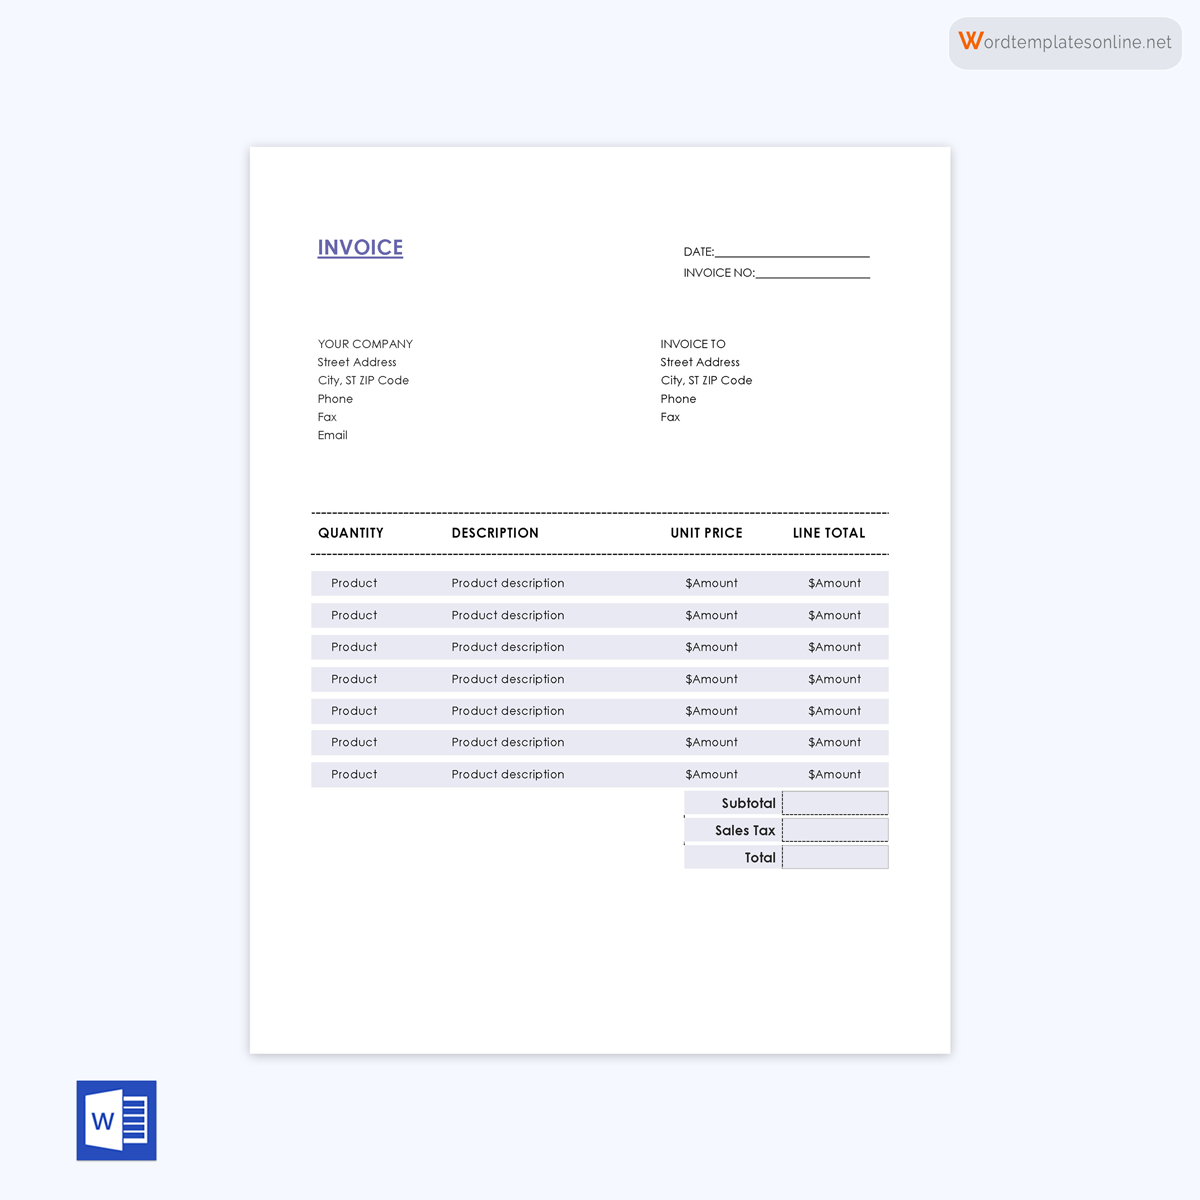 Editable invoice form in Word format - Download